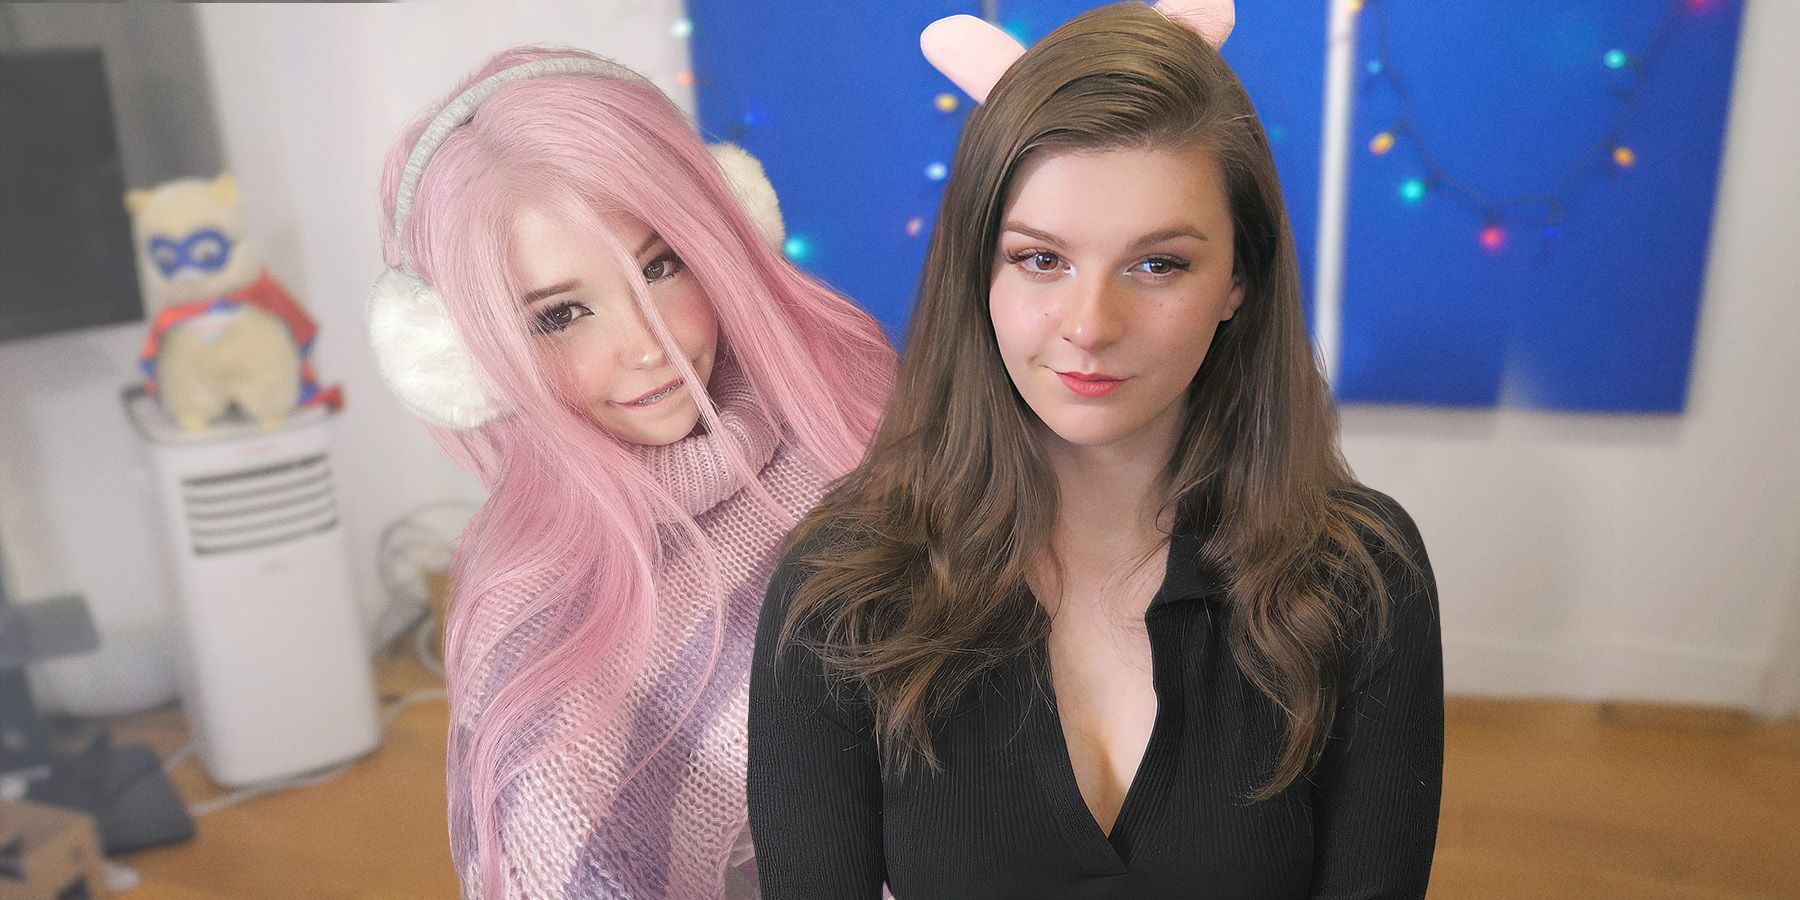 Gamer Girl Belle Delphine and F1NN5TER Are Blowing Up the Internet.